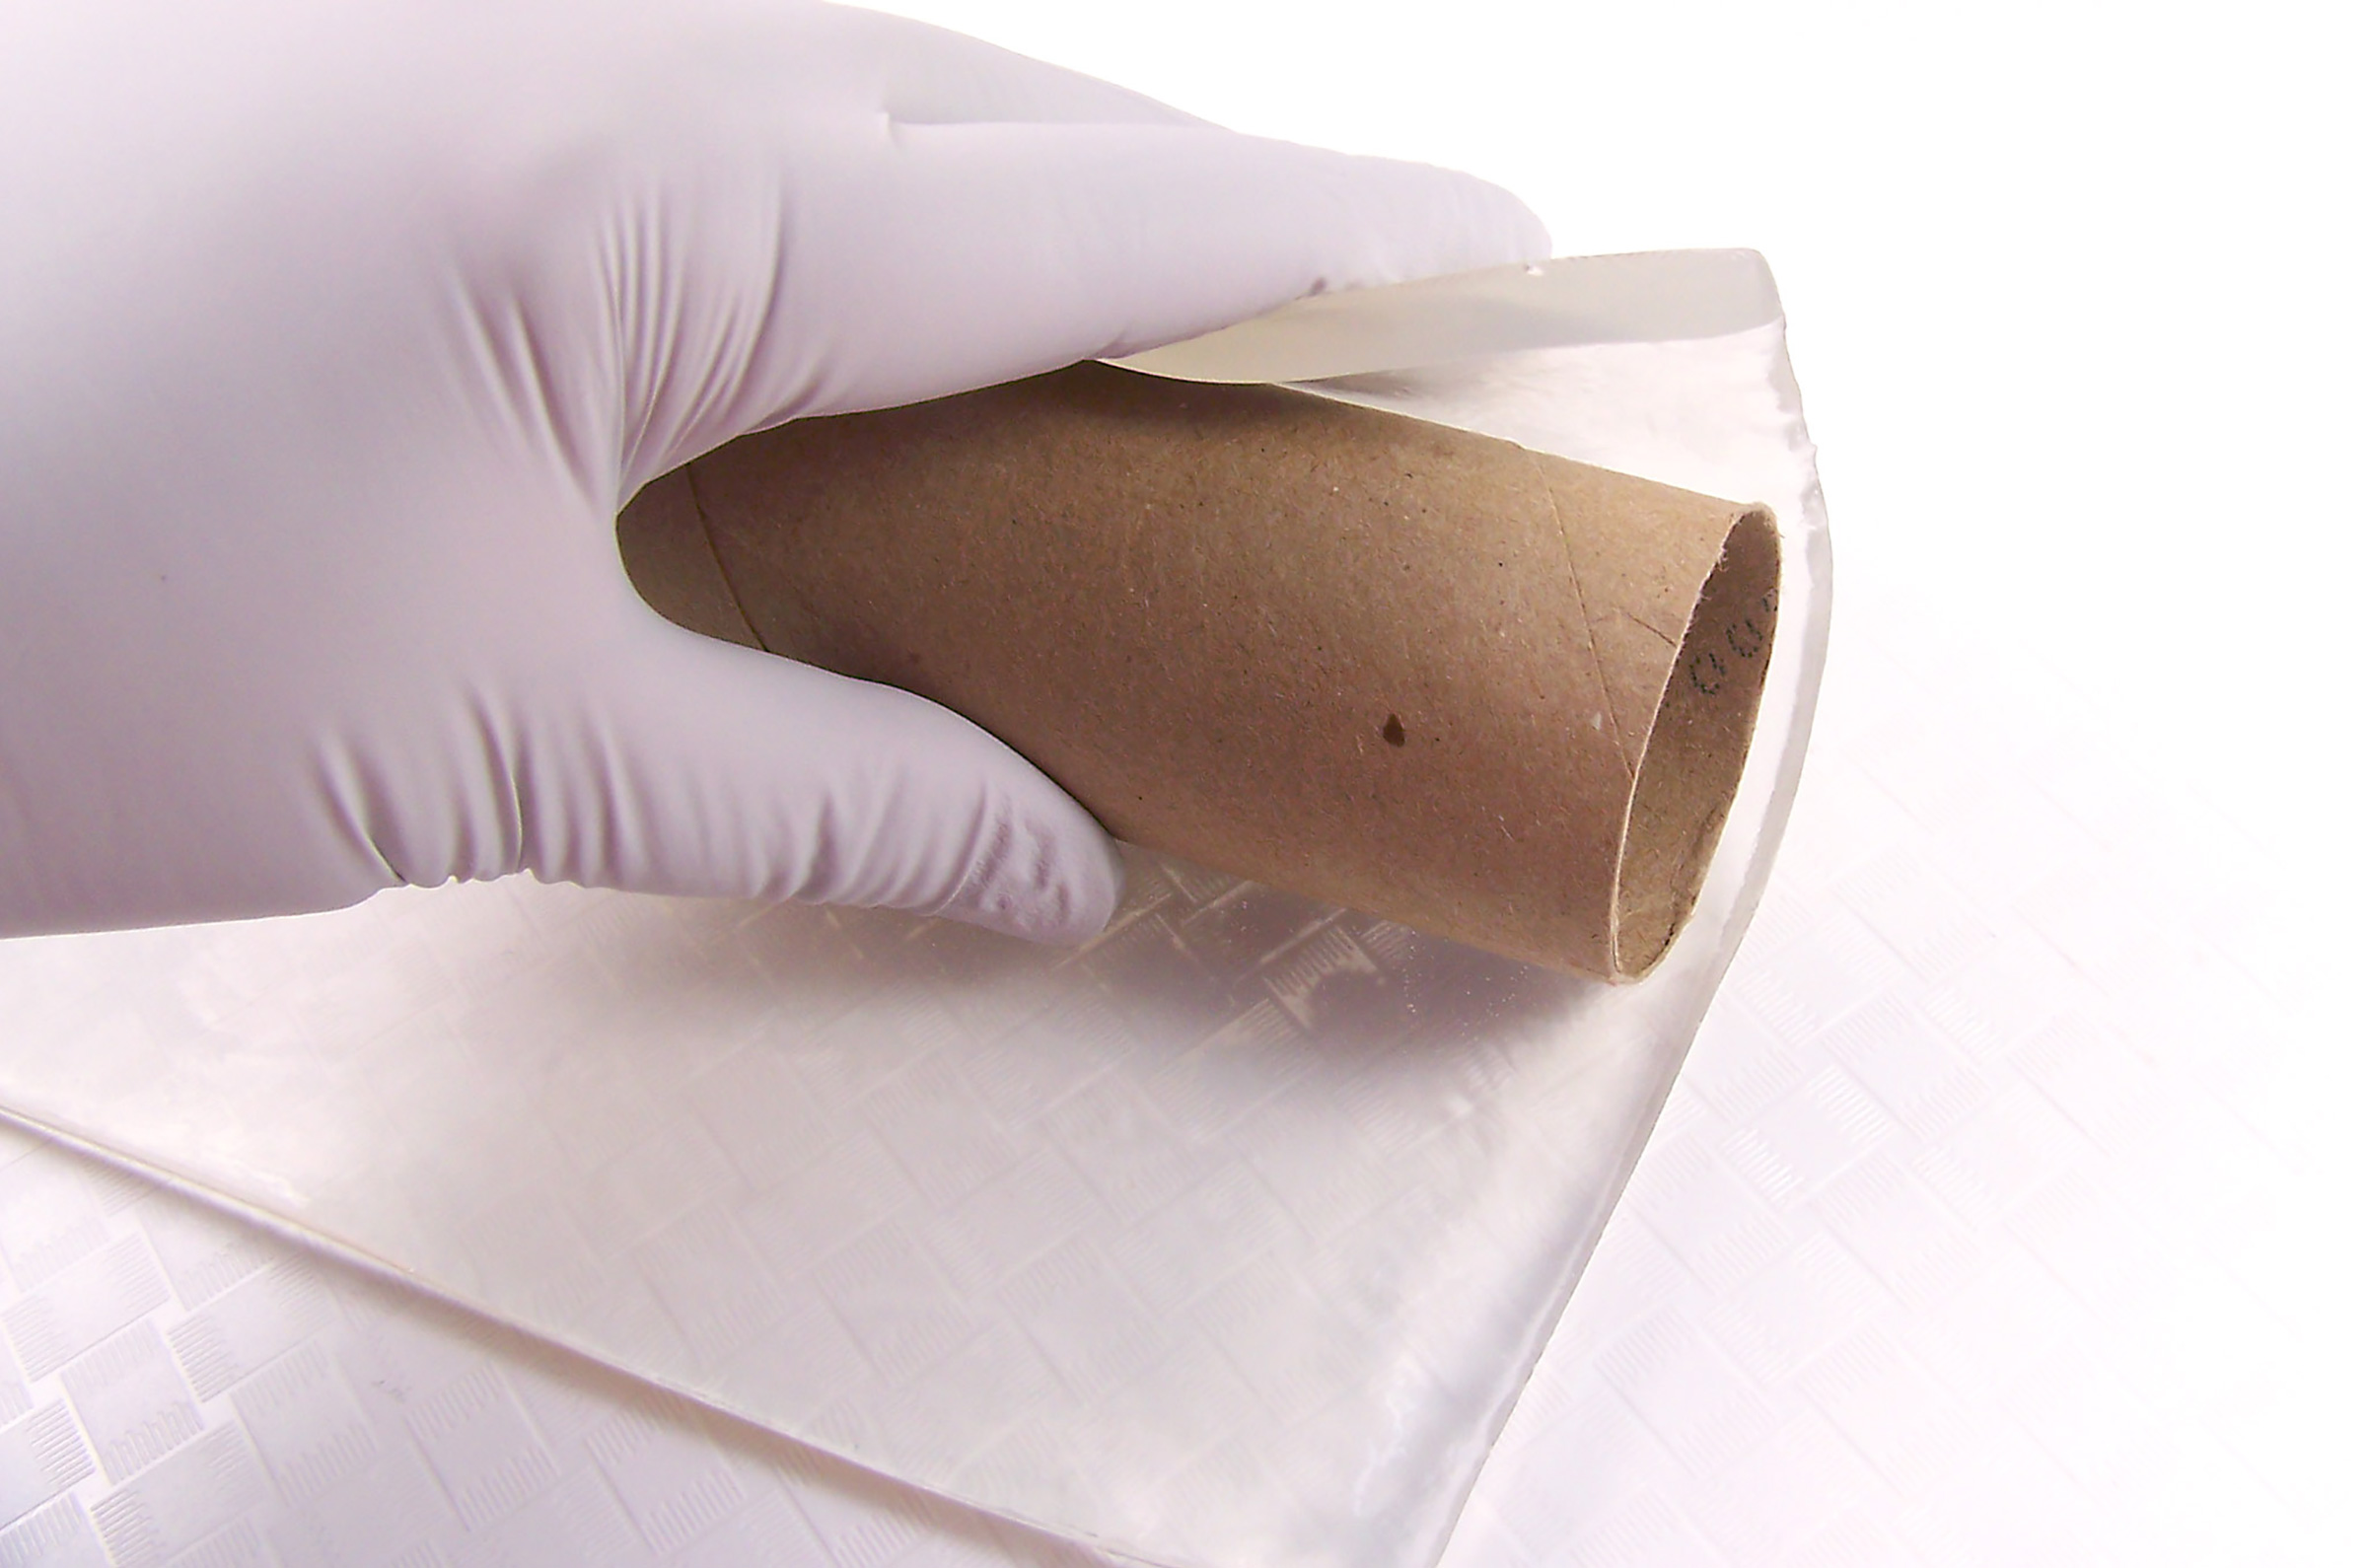 mold soap around paper towel roll and hold in place